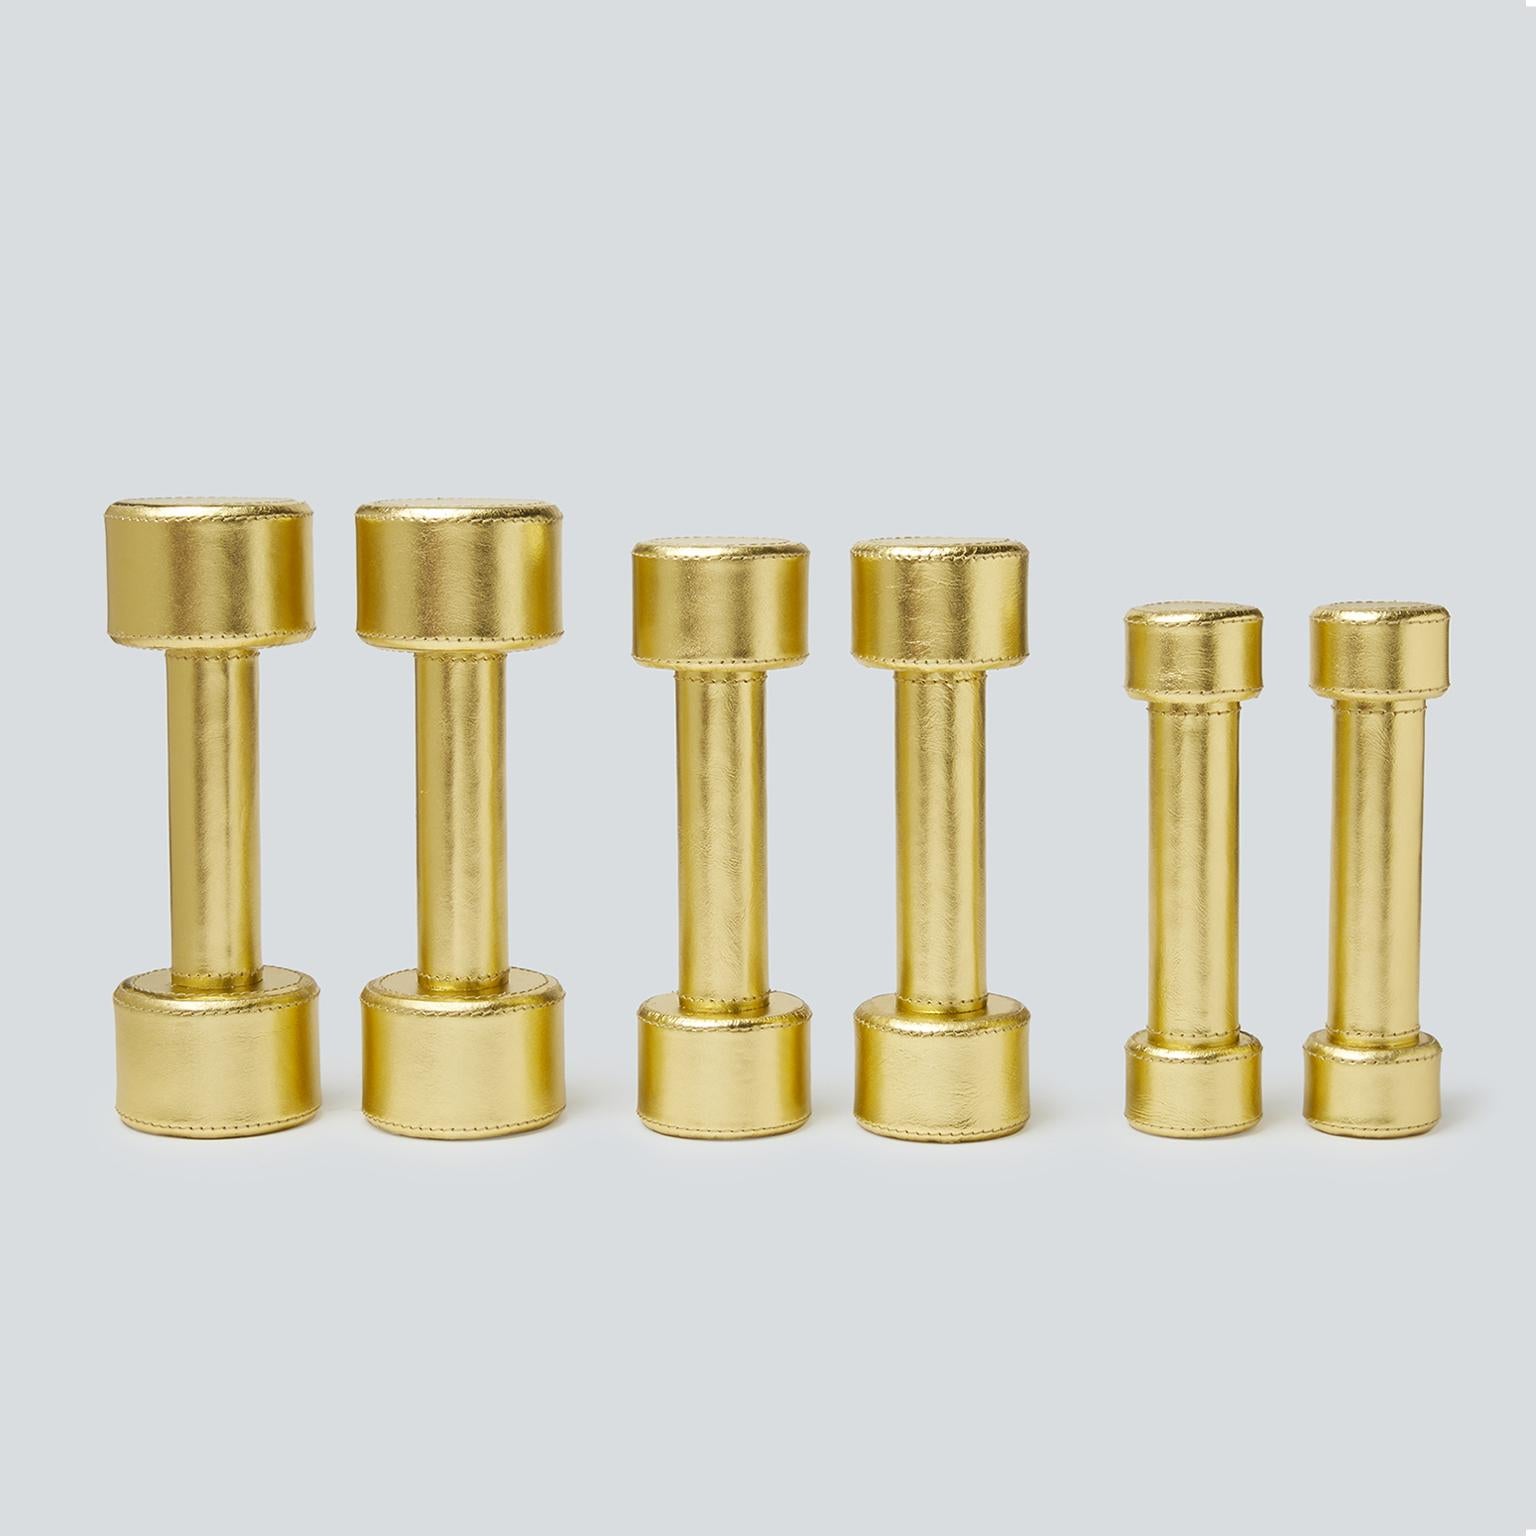 Hand-Crafted Dumbbell Set in Stainless Steel Covered in Gold Leather, Atelier Biagetti